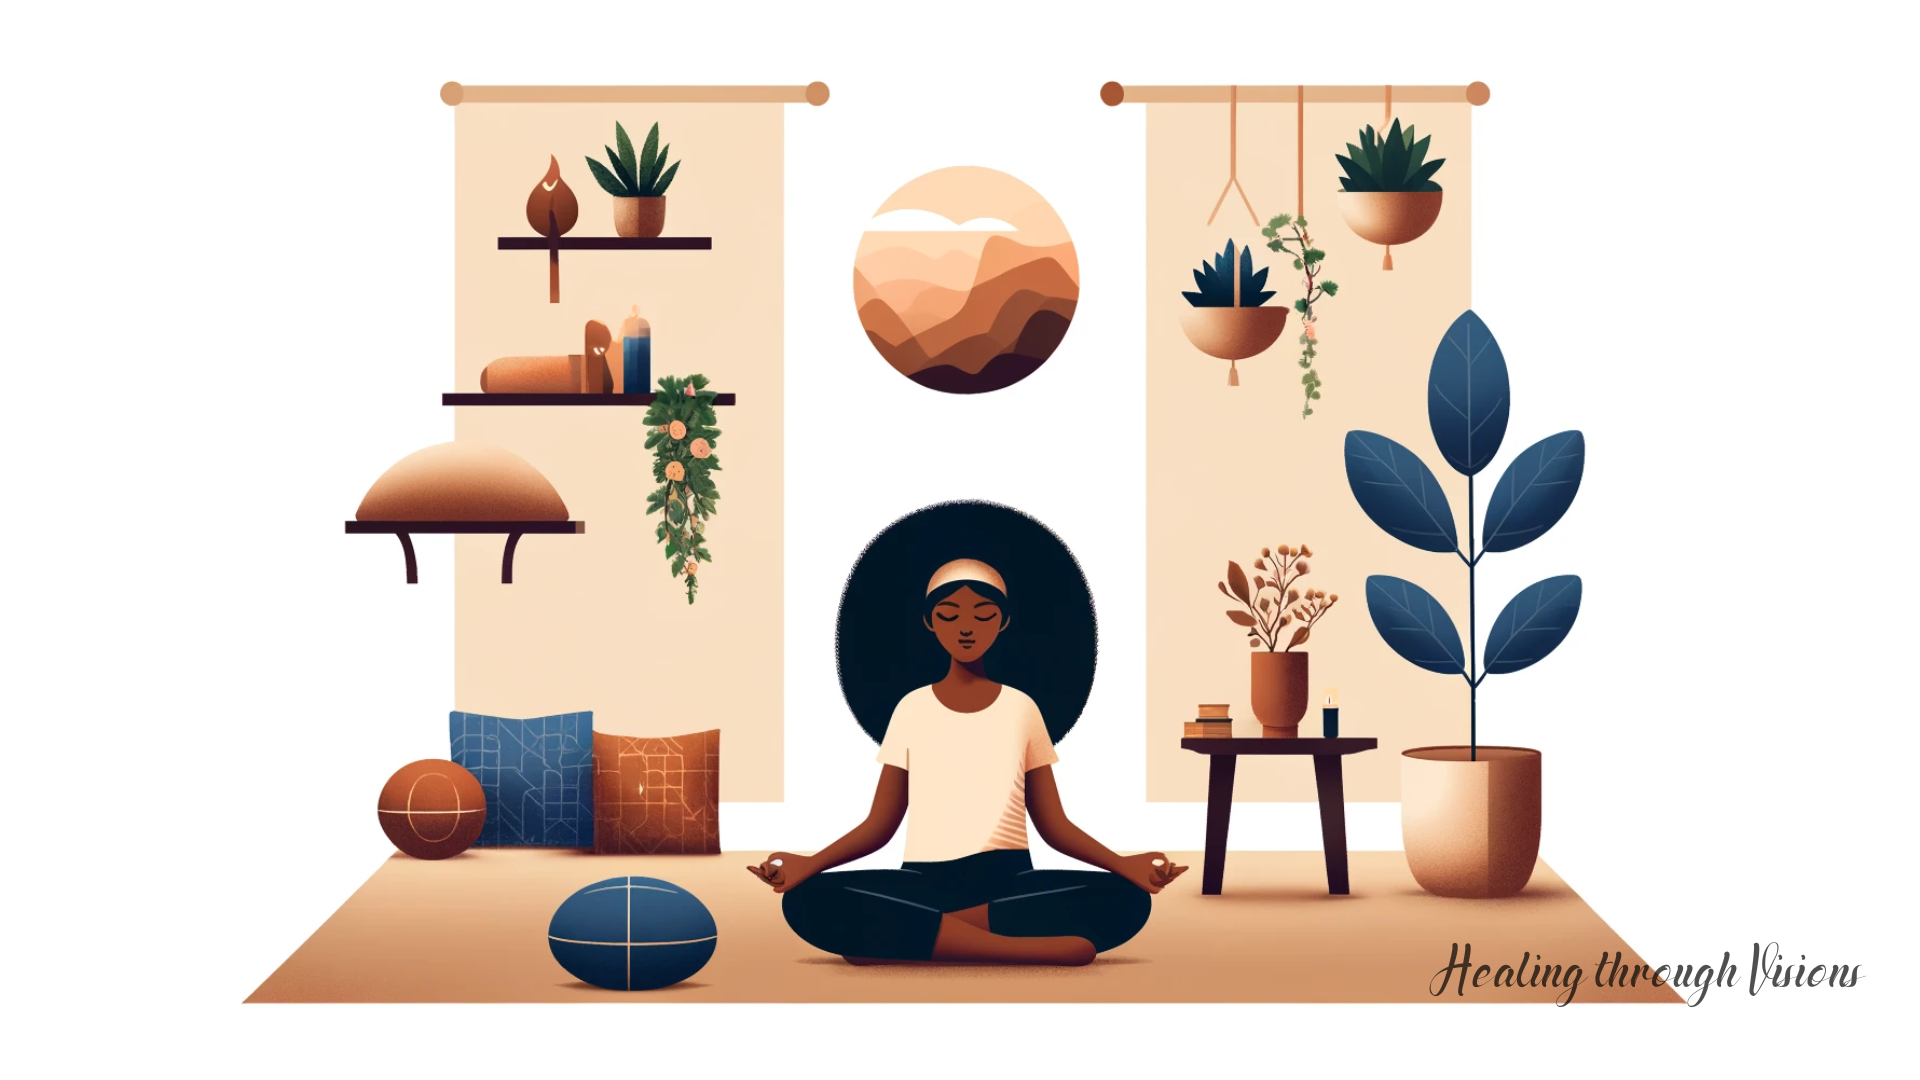 Healing Through Visions Daily Meditation Practice - A scene depicting a Daily Meditation Practice featuring a Black woman meditating in a comfortable, serene home environment. The setting includes a cozy meditation corner with cushions, ambient lighting, and elements of nature like small plant. The woman is seated in a lotus position, embodying a peaceful and focused demeanor. The image conveys a sense of tranquility and personal space, ideal for meditation and self-reflection.